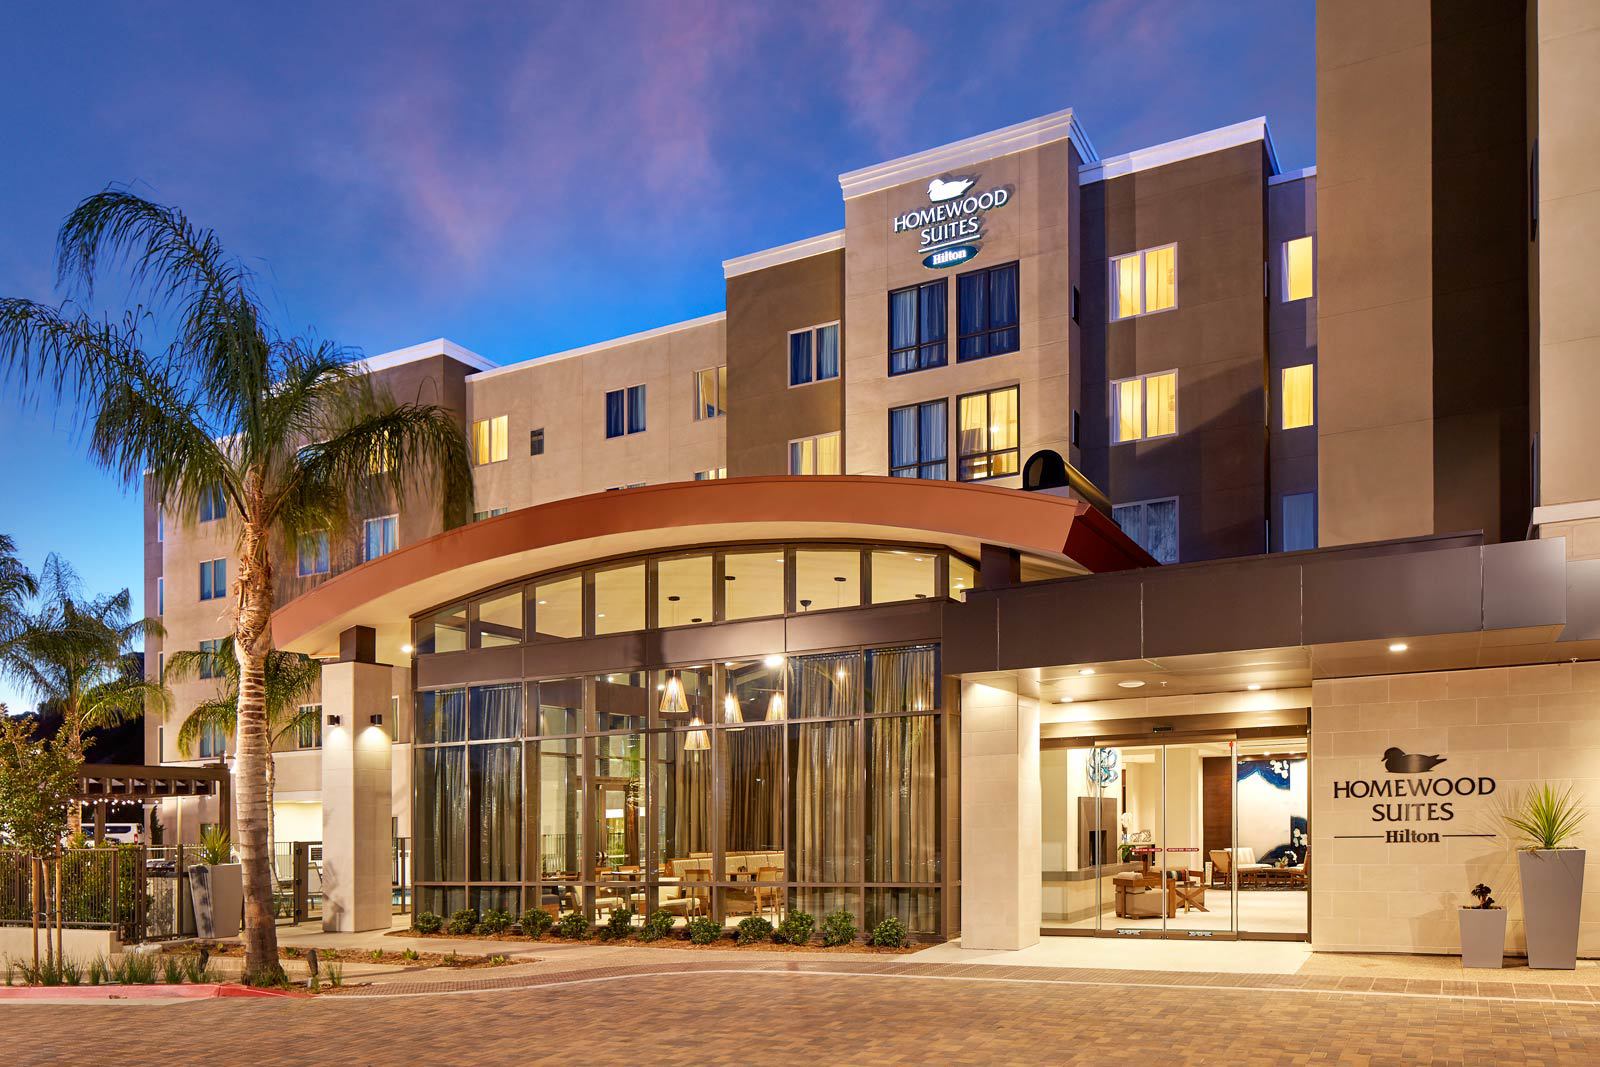 Photo of Homewood Suites by Hilton San Diego Mission Valley/Zoo, San Diego, CA